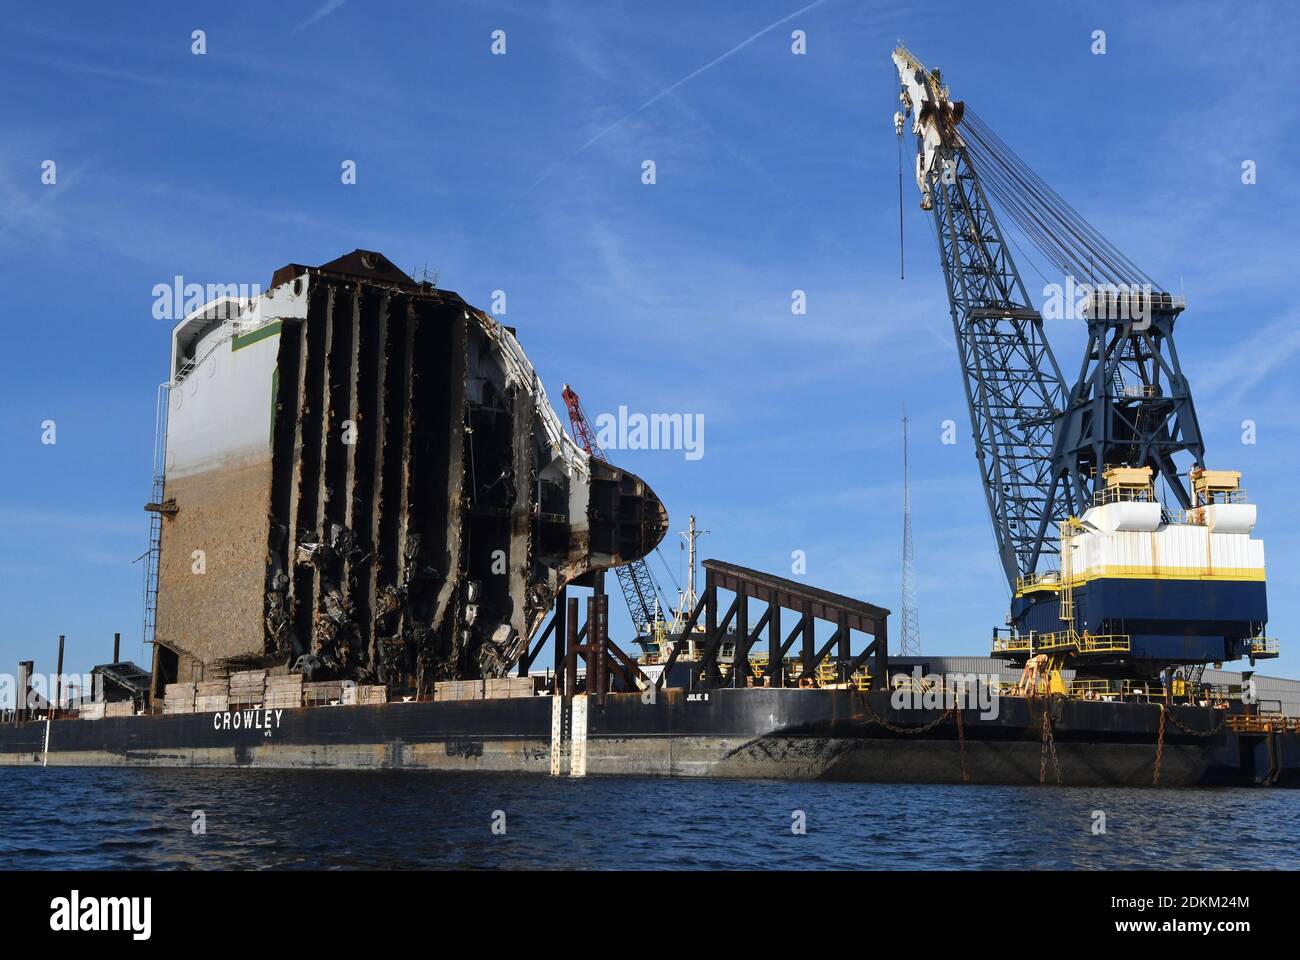 Georgia, USA. 14th Dec, 2020. December 14, 2020 - Brunswick, Georgia, United States - The bow section of the Golden Ray cargo ship sits on a barge on December 14, 2020 in Brunswick, Georgia. A salvage company is cutting the vessel into eight segments, each of which will be removed by a barge. The vehicle carrier, loaded with 4200 new cars, capsized in St. Simons Island Sound on September 8, 2019 as it was leaving the Port of Brunswick, Georgia. (Paul Hennessy/Alamy) Credit: Paul Hennessy/Alamy Live News Stock Photo